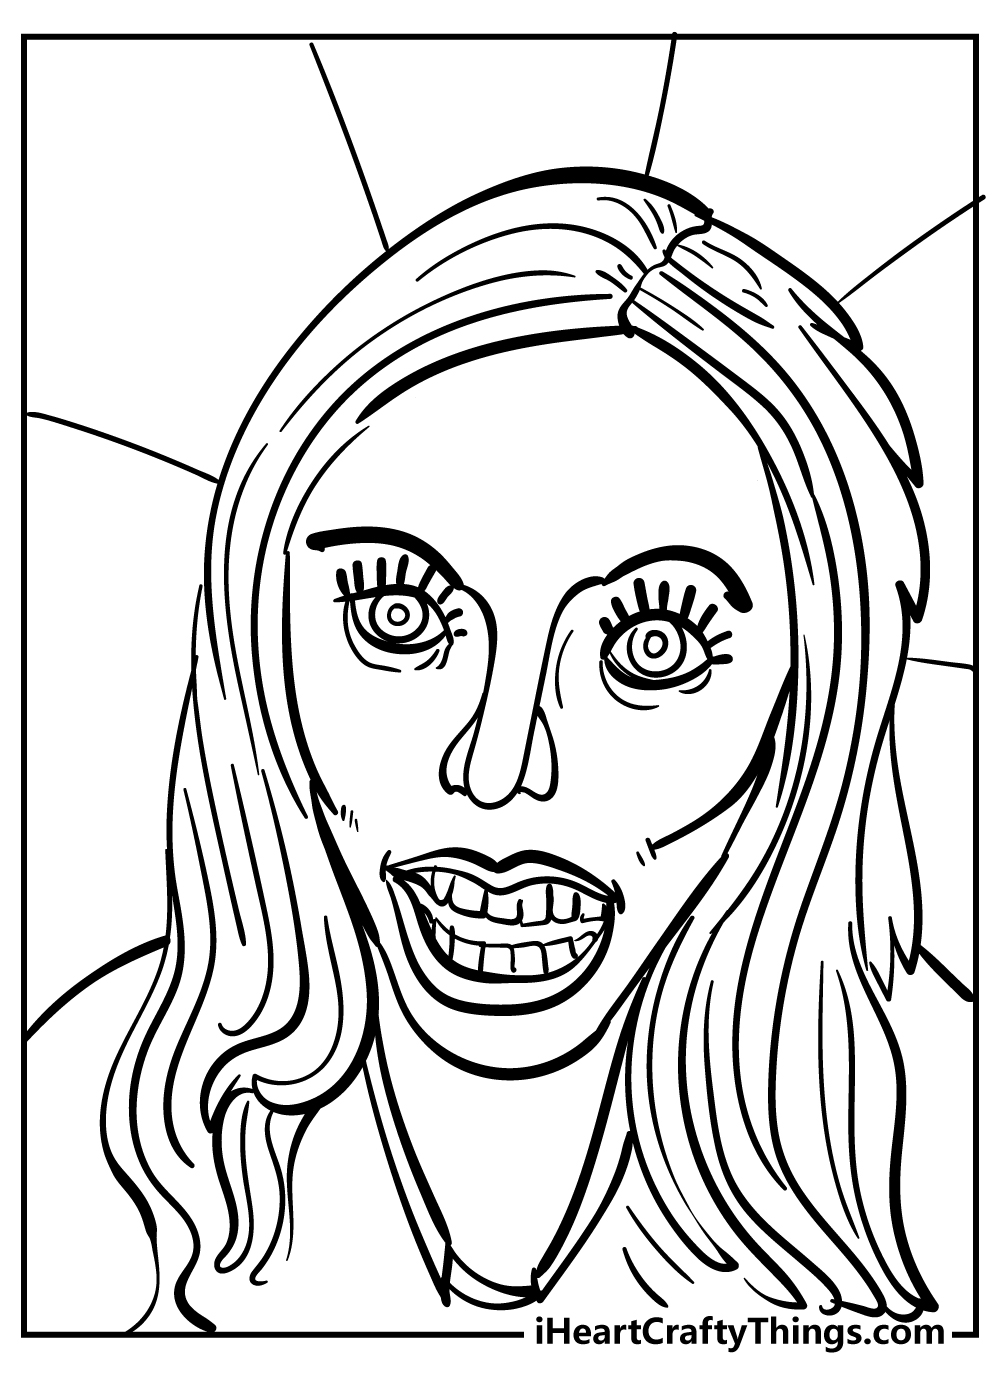 Creepy Coloring Book for adults free download